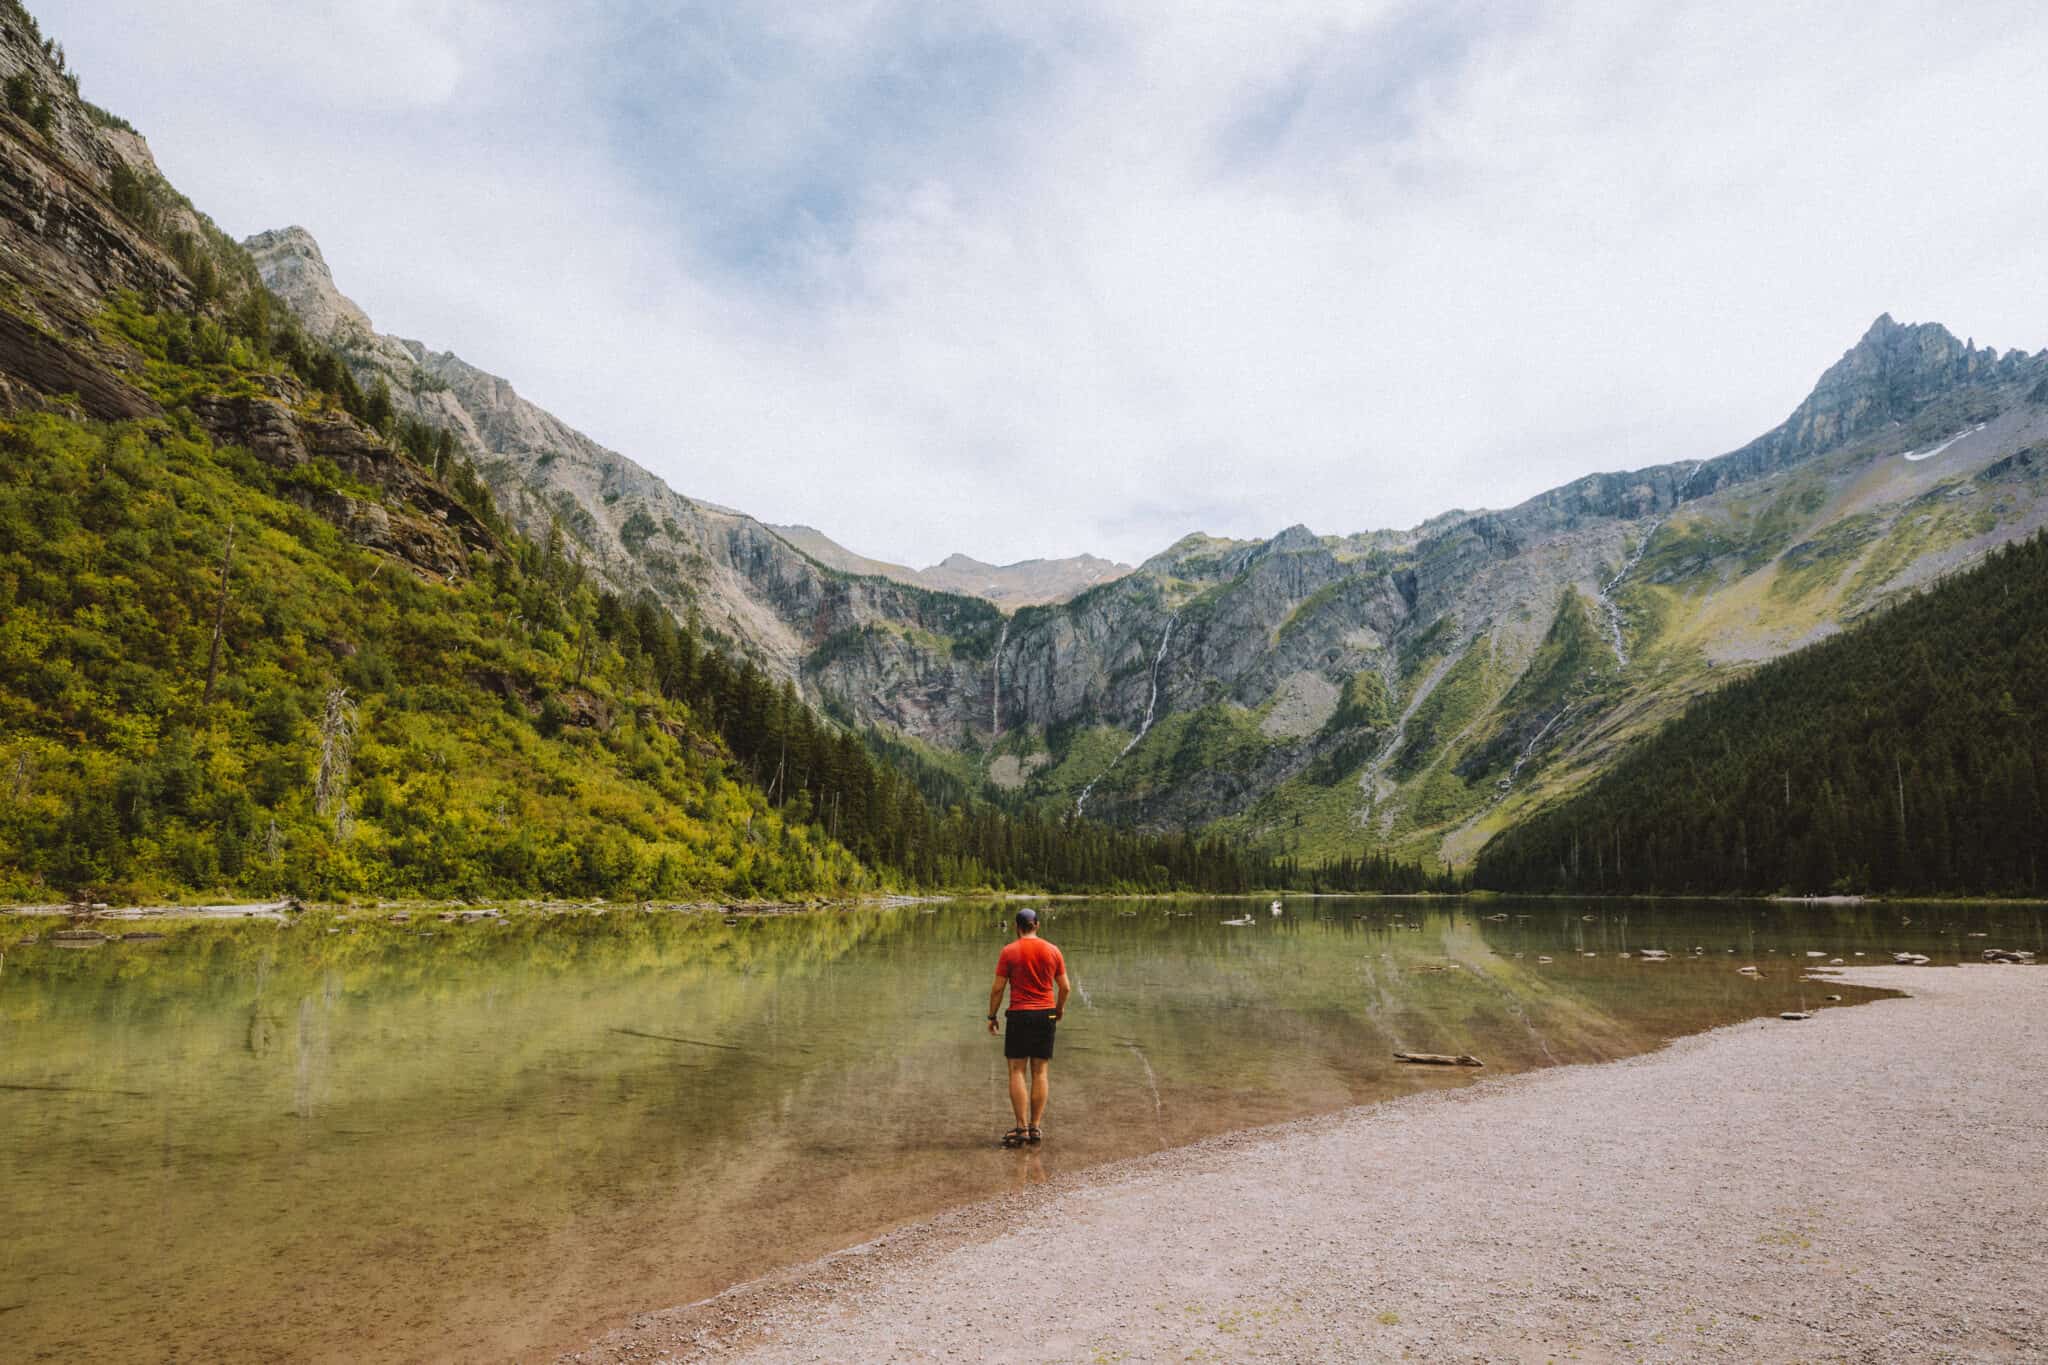 Take The Epic Avalanche Lake Hike In Glacier National Park (Plus Essential Parking Tips And Facts)